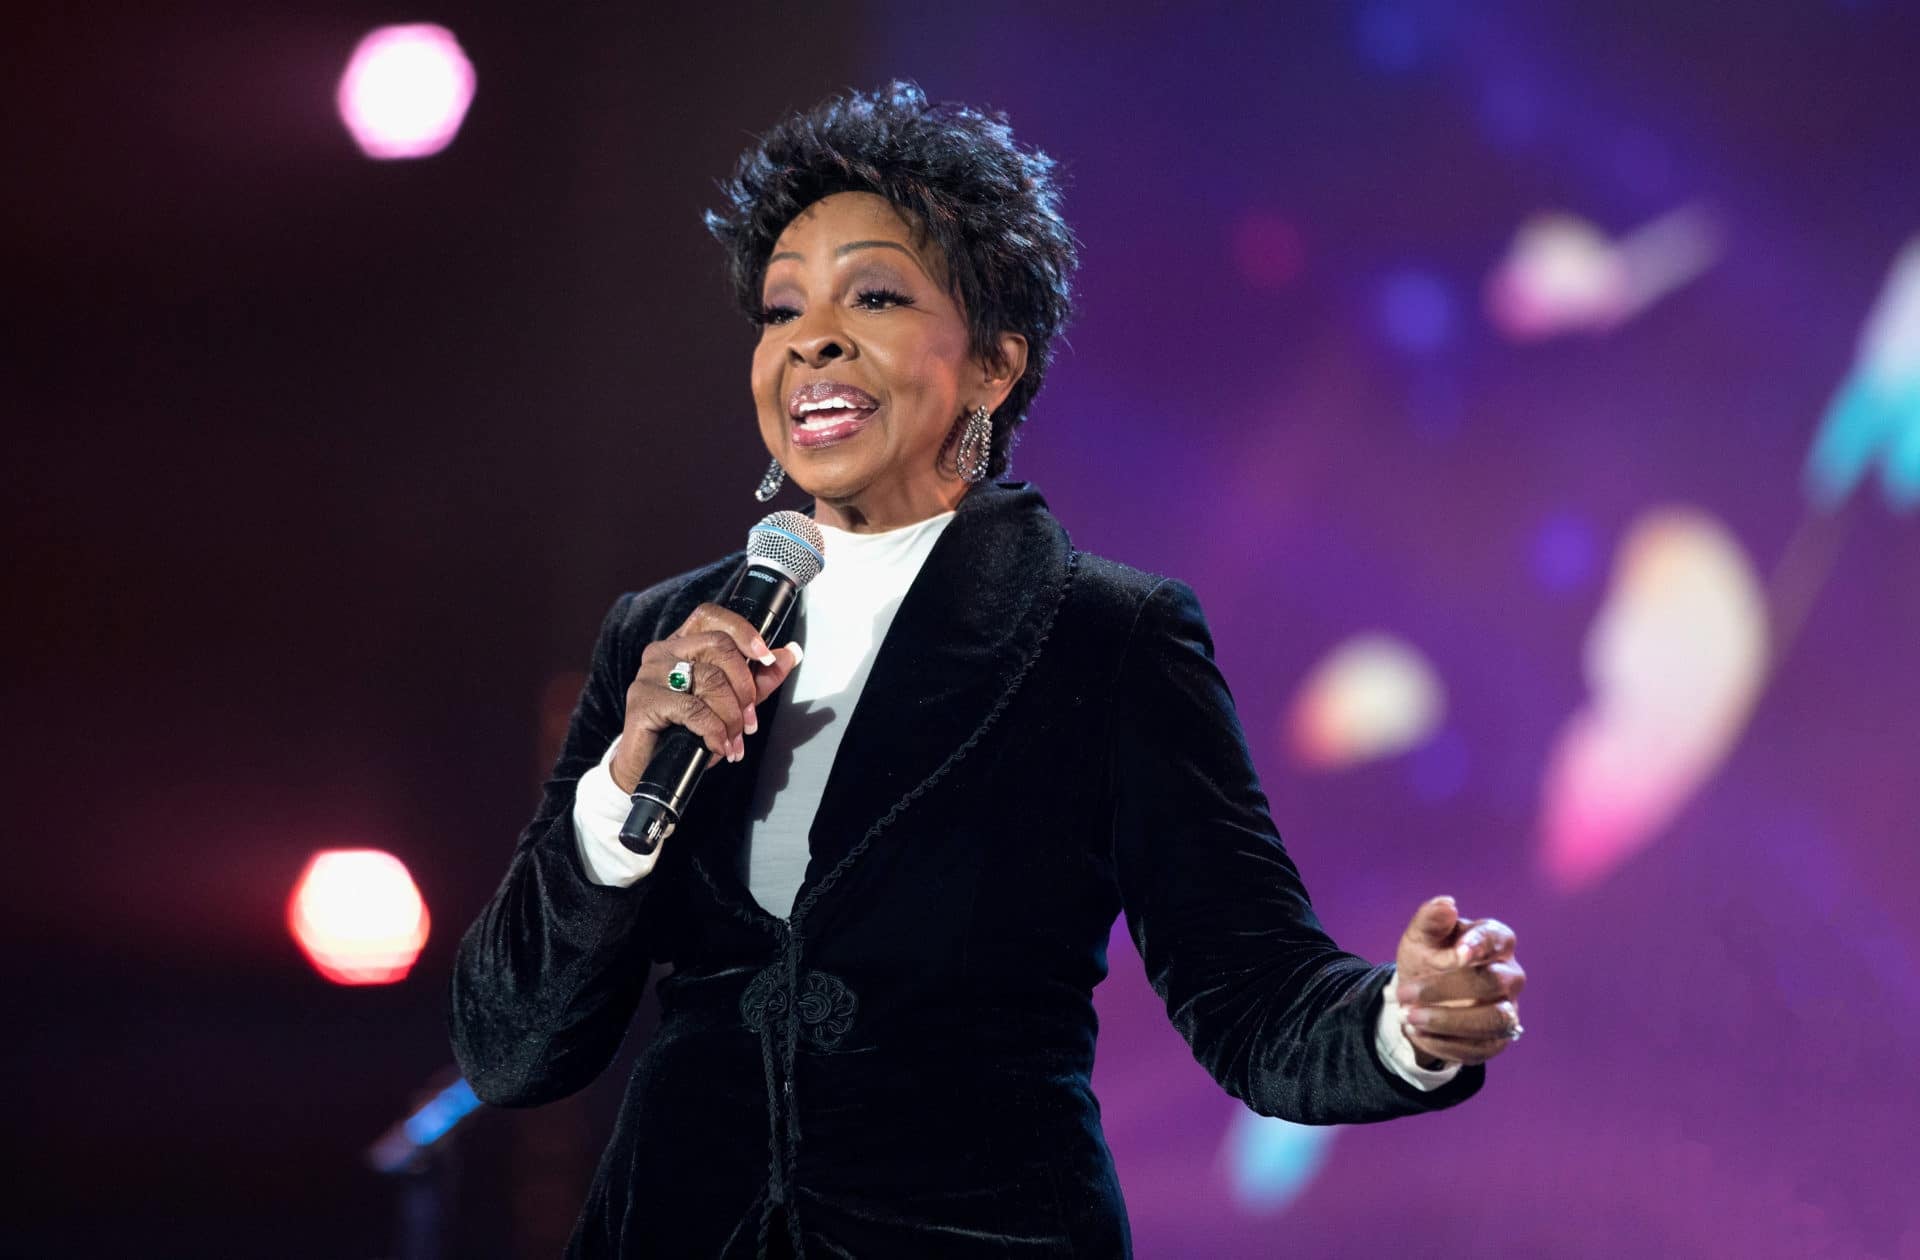 Gladys Knight Defends Decision To Perform National Anthem At Super Bowl